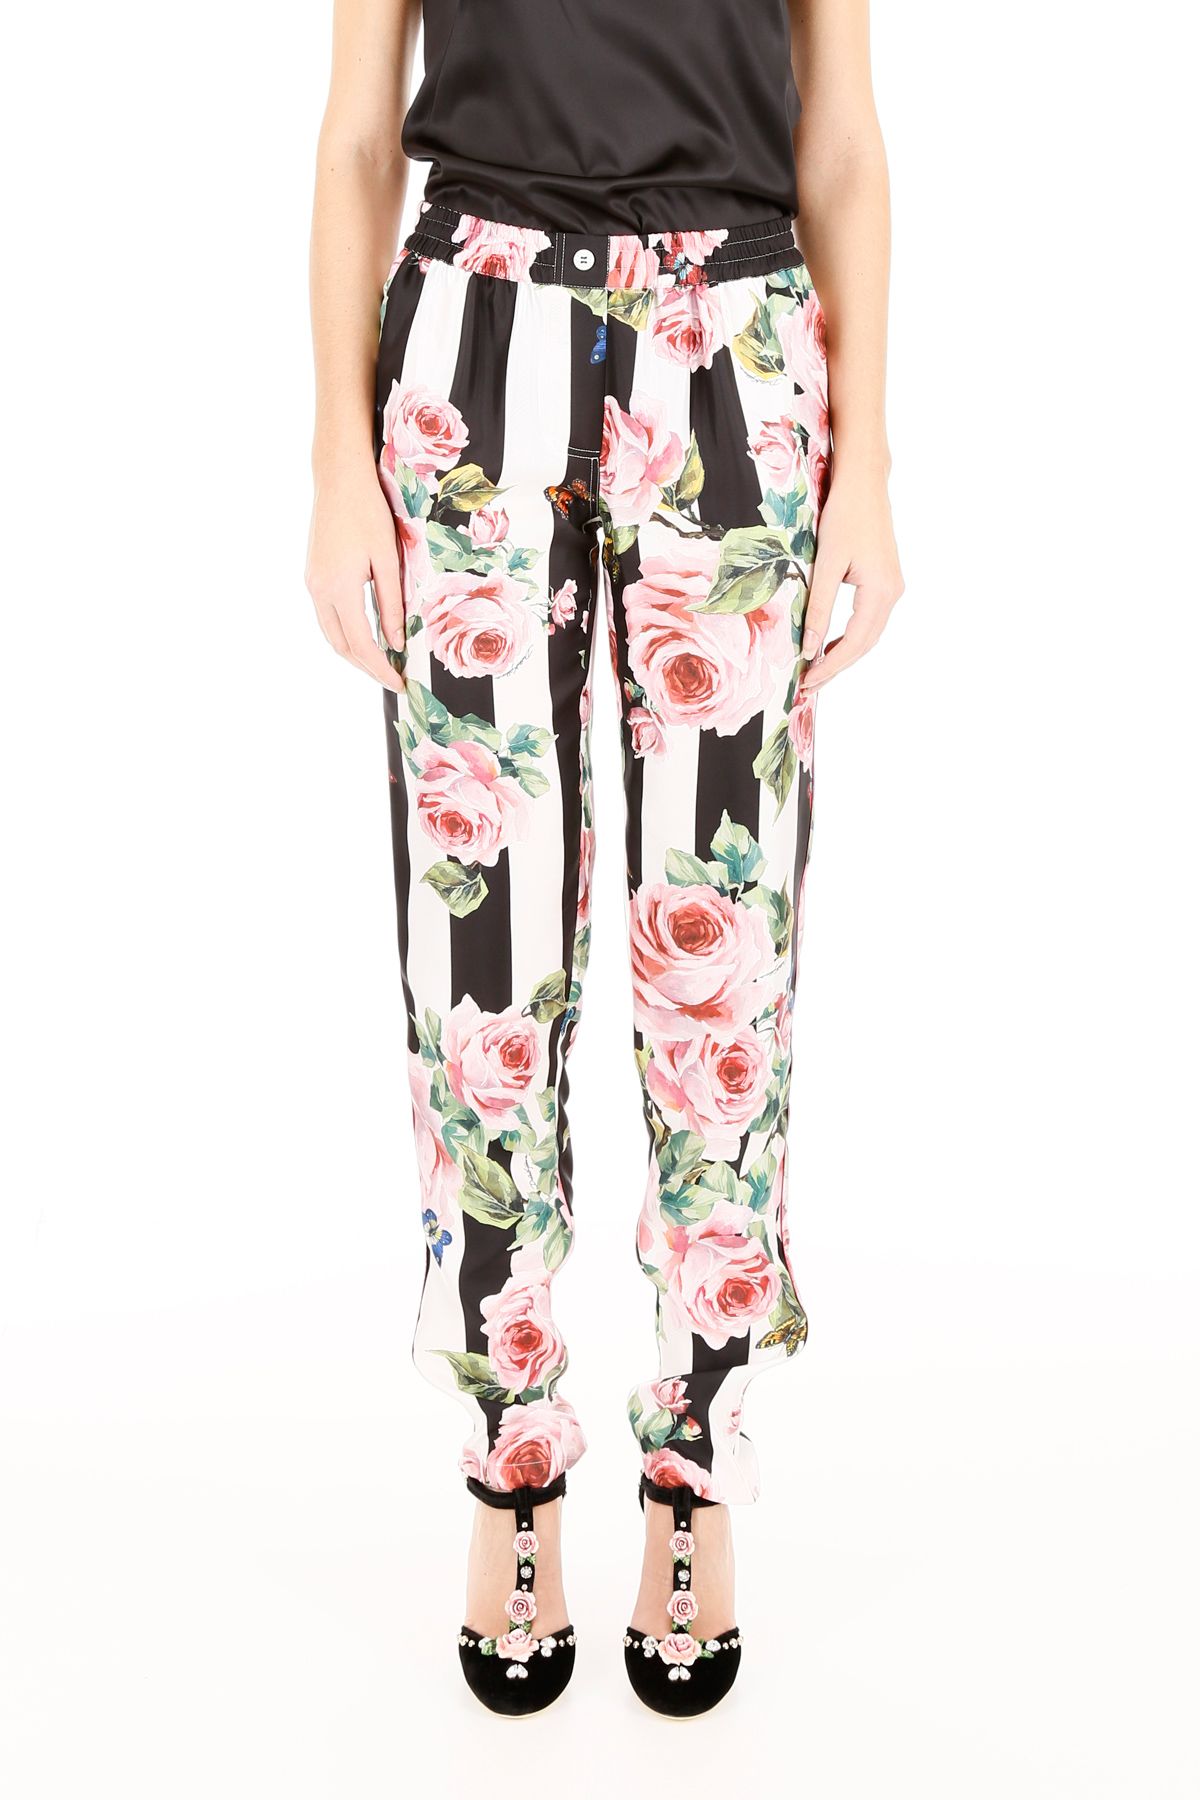 DOLCE & GABBANA Floral Print Pyjama Trousers in Rose-Righe Bco ...